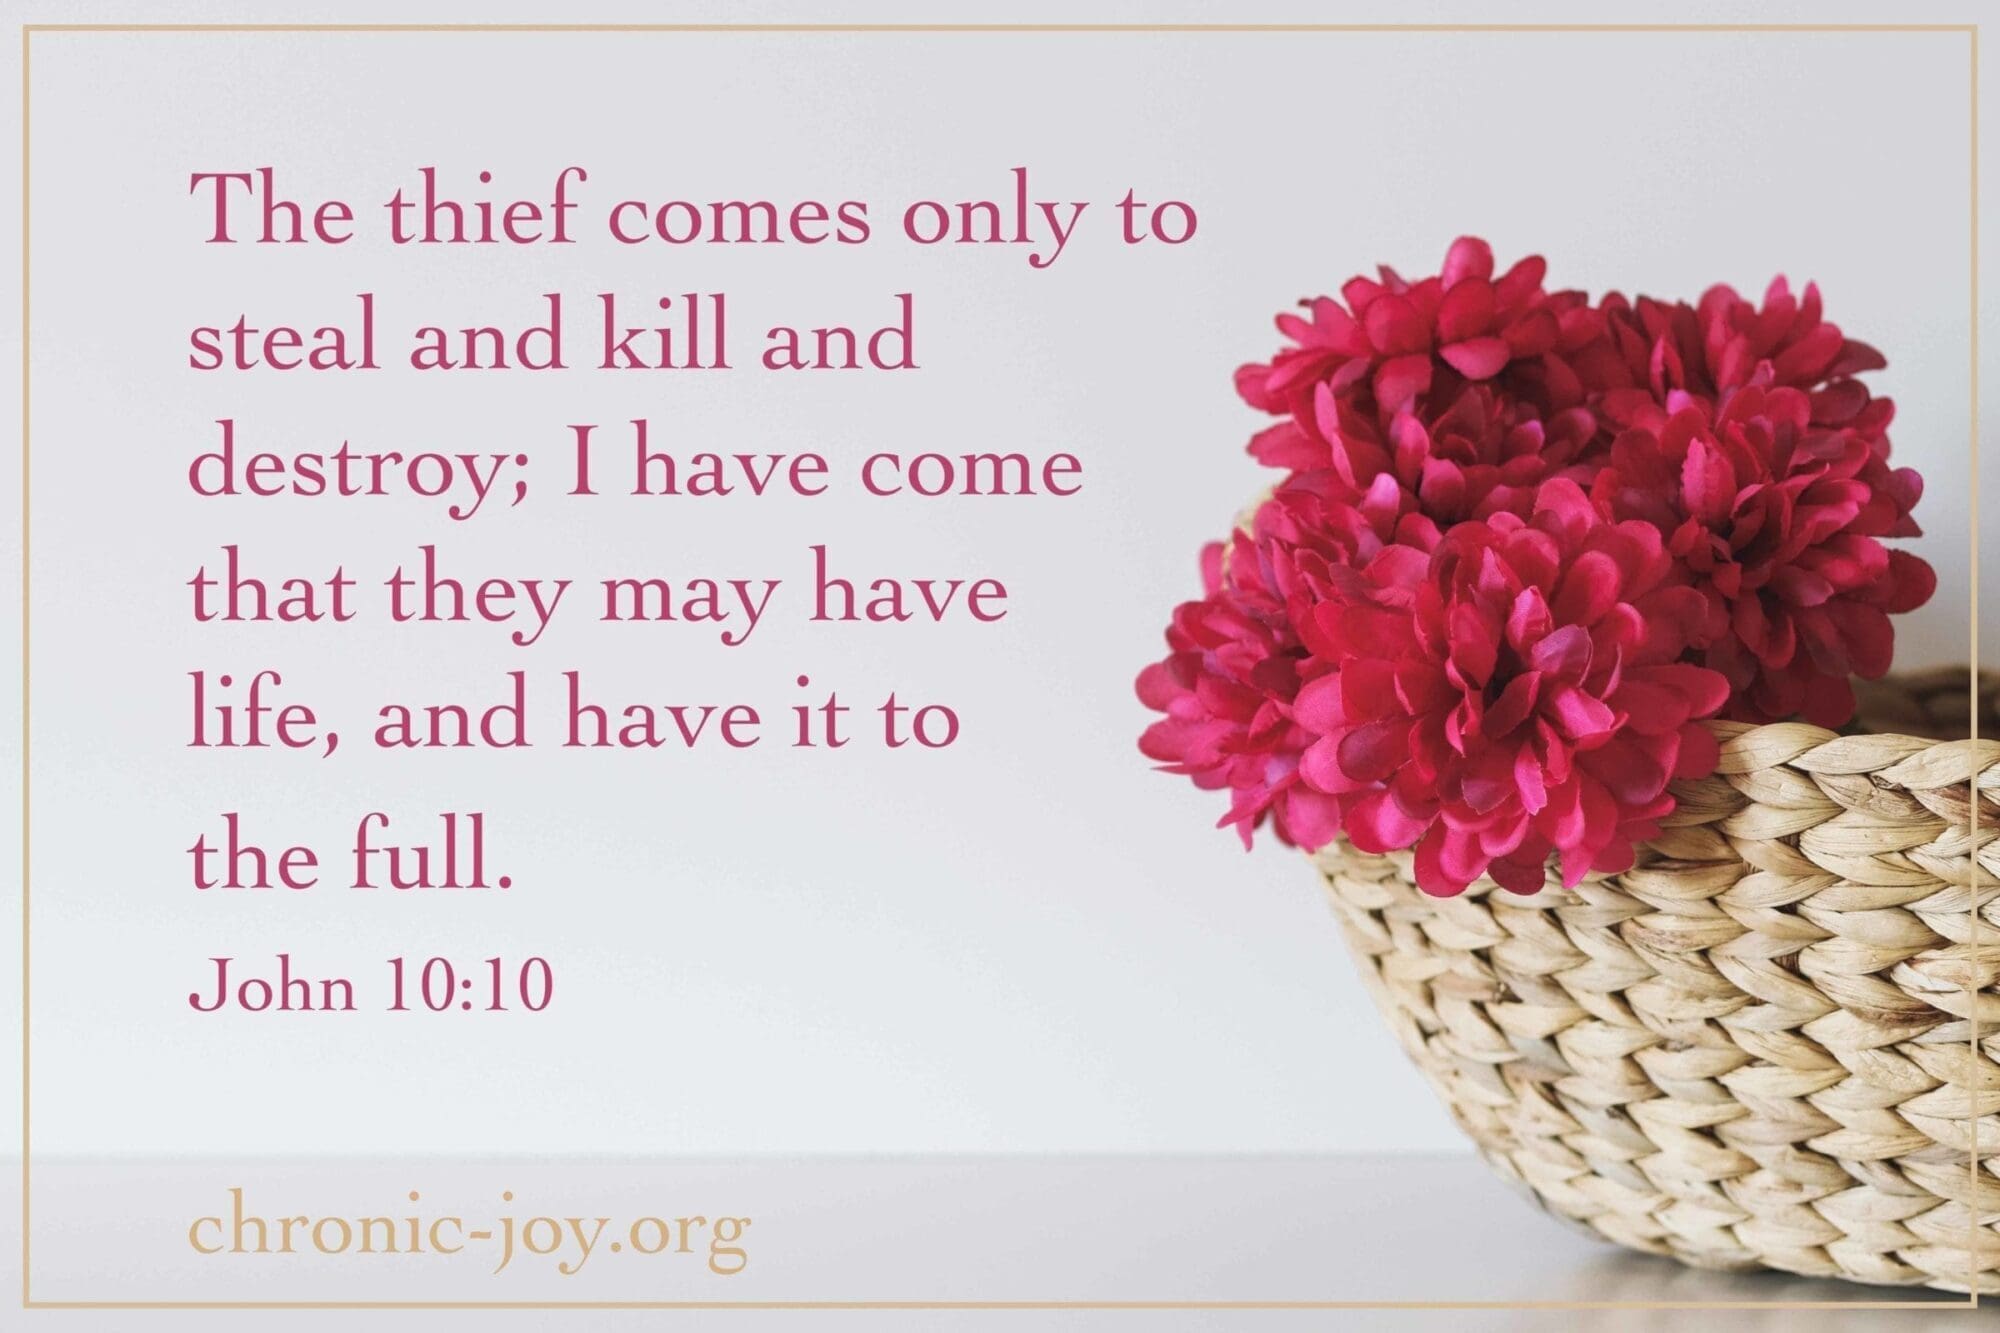 The thief comes only to steal and kill and destroy; I have come that they may have life, and have it to the full. (John 10:10)